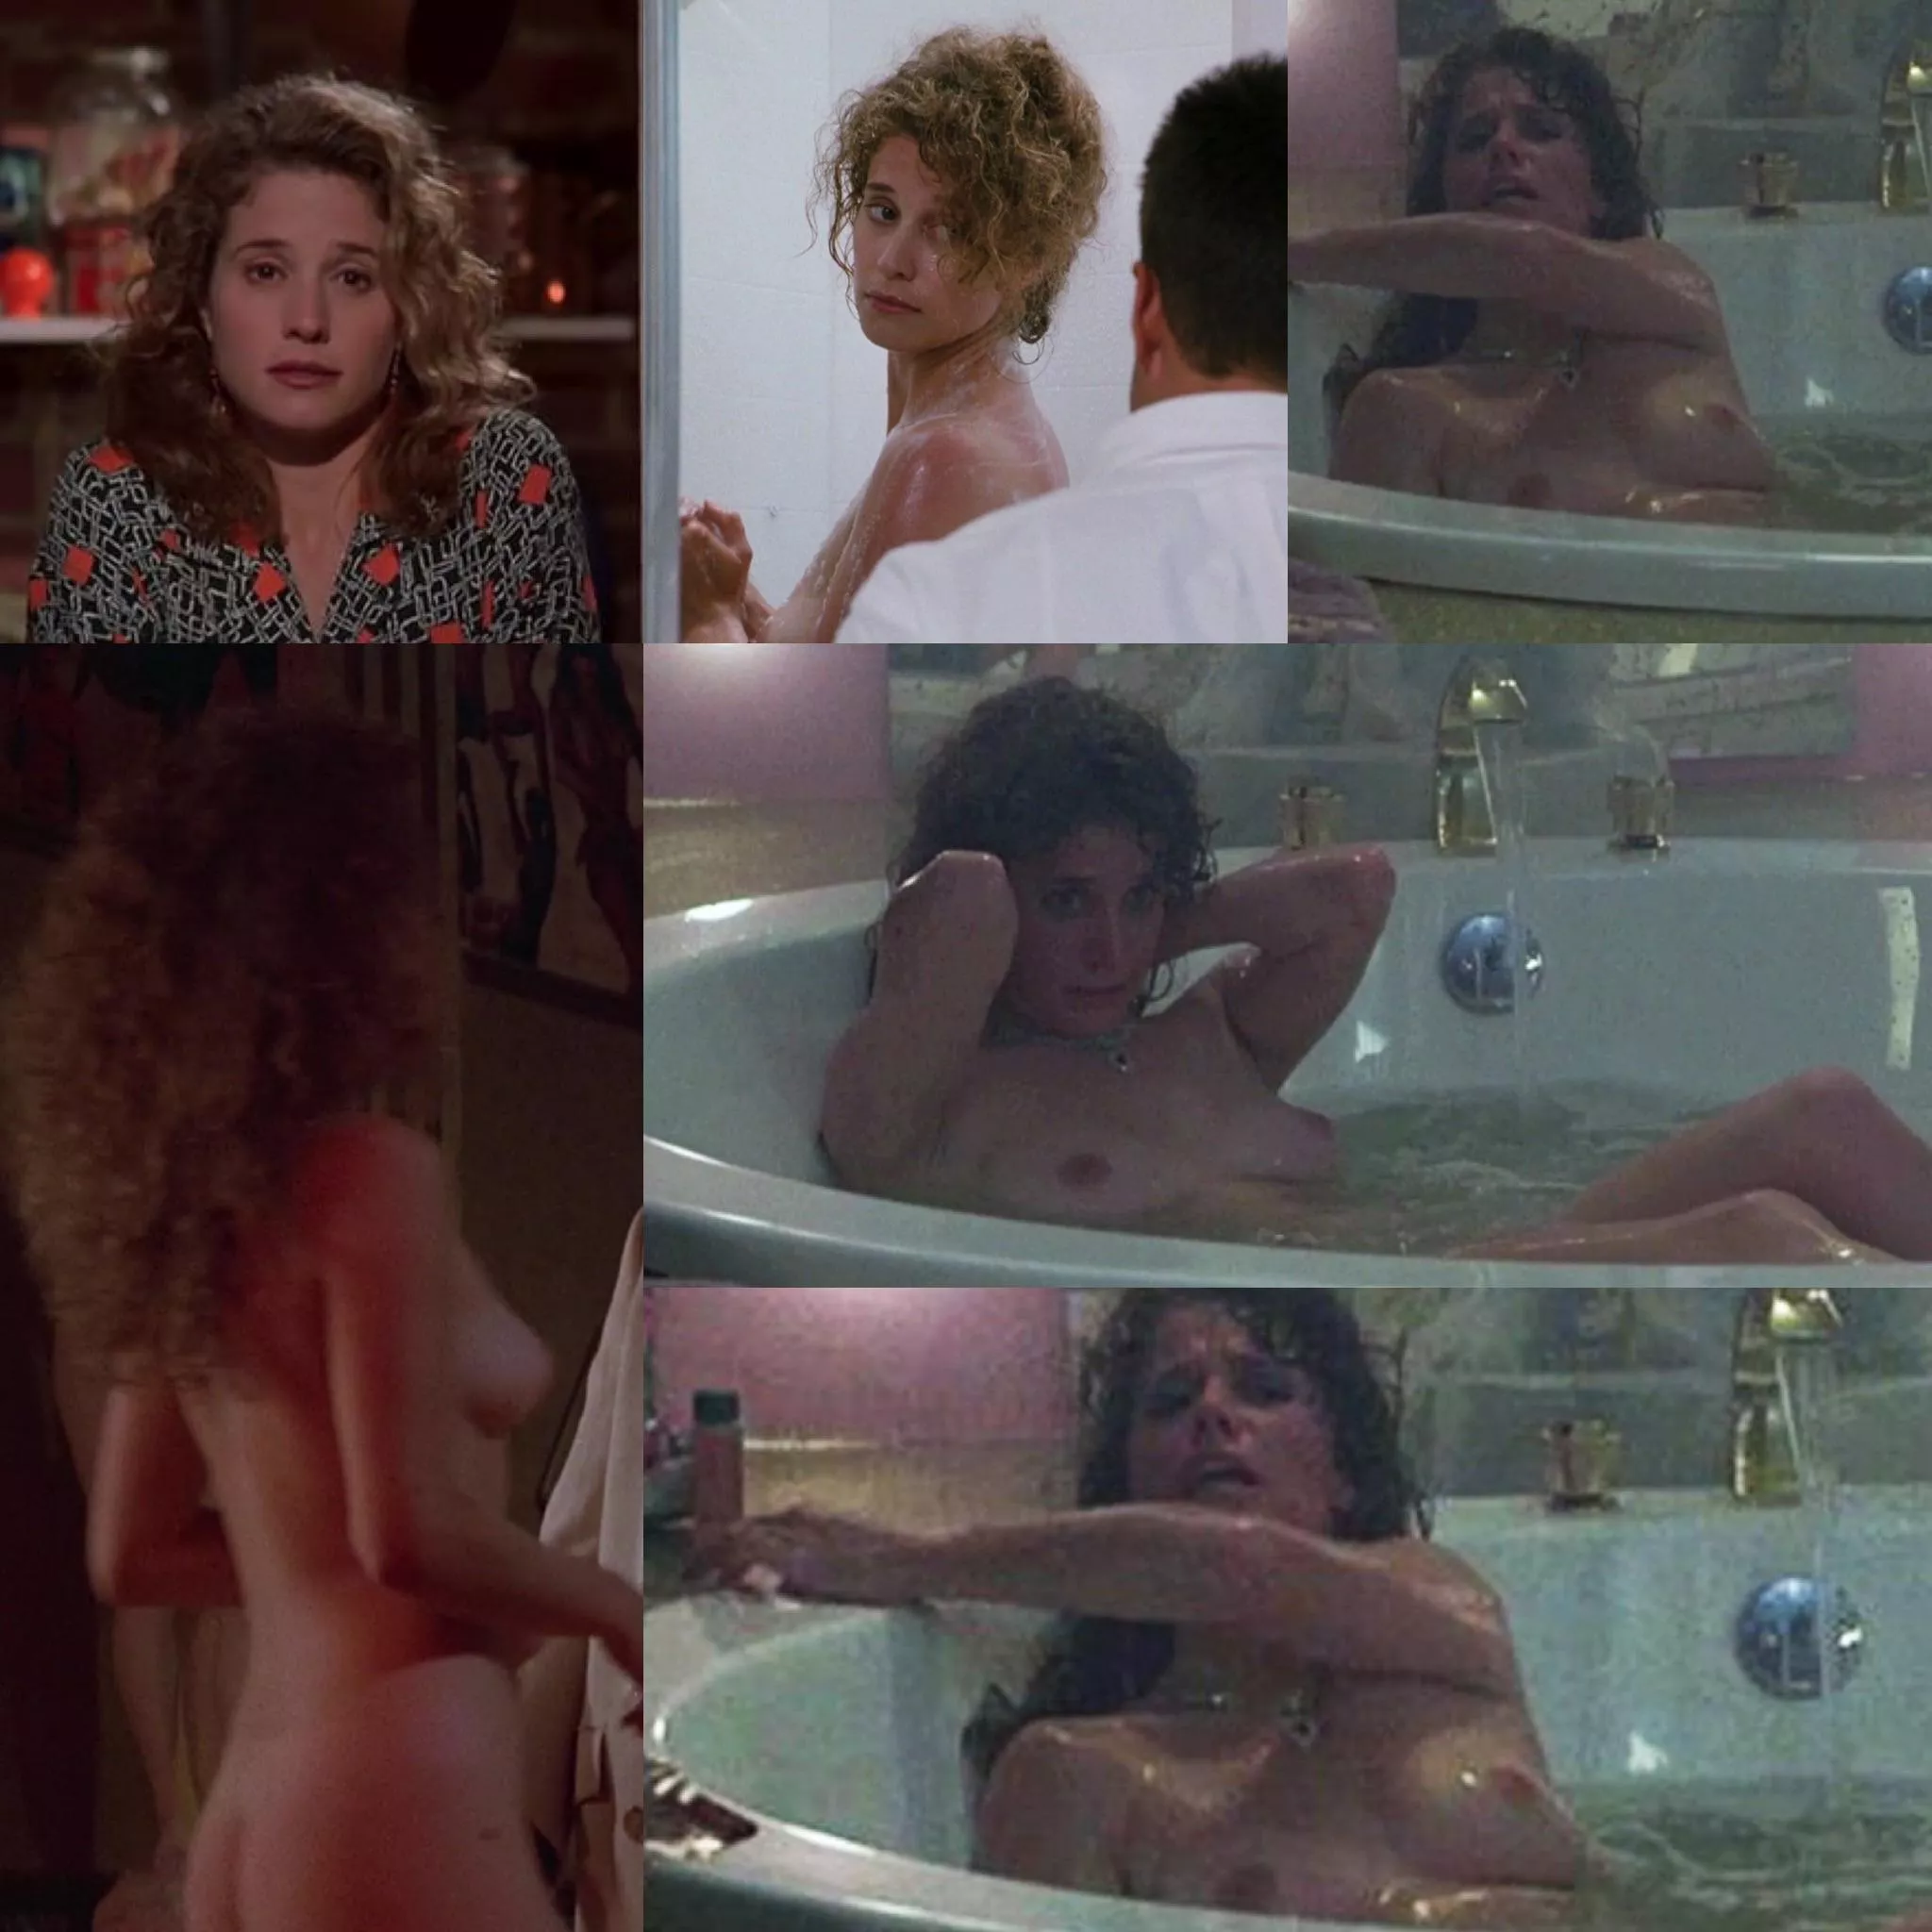 Watch nude iconic beauty nancy travis porn picture on category OnOffCelebs ...